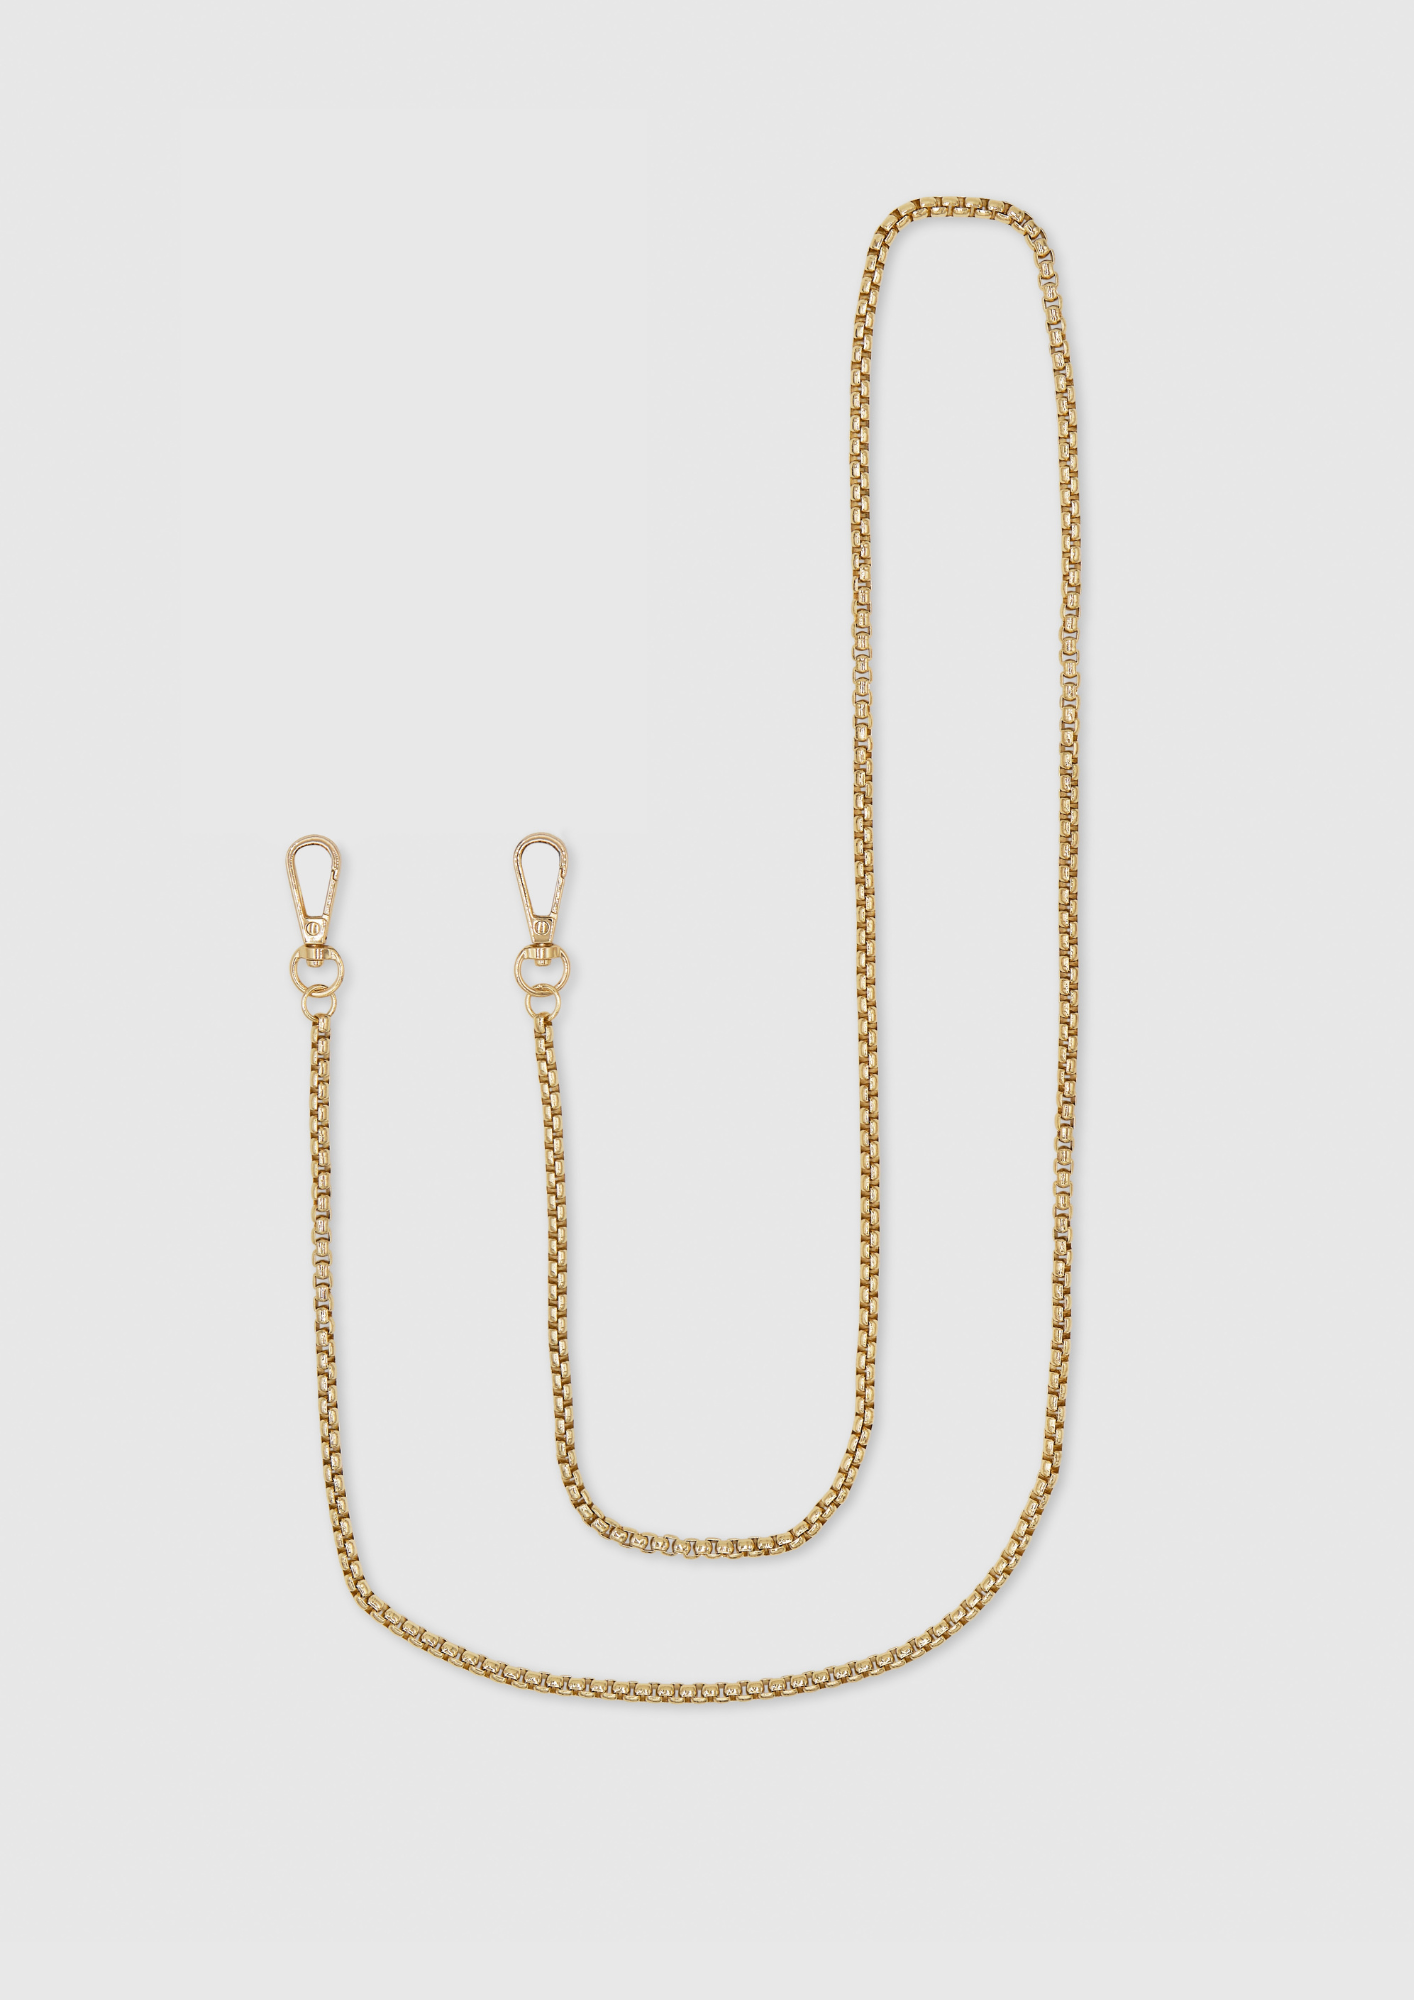 Gold-Plated Crossbody Phone Chain